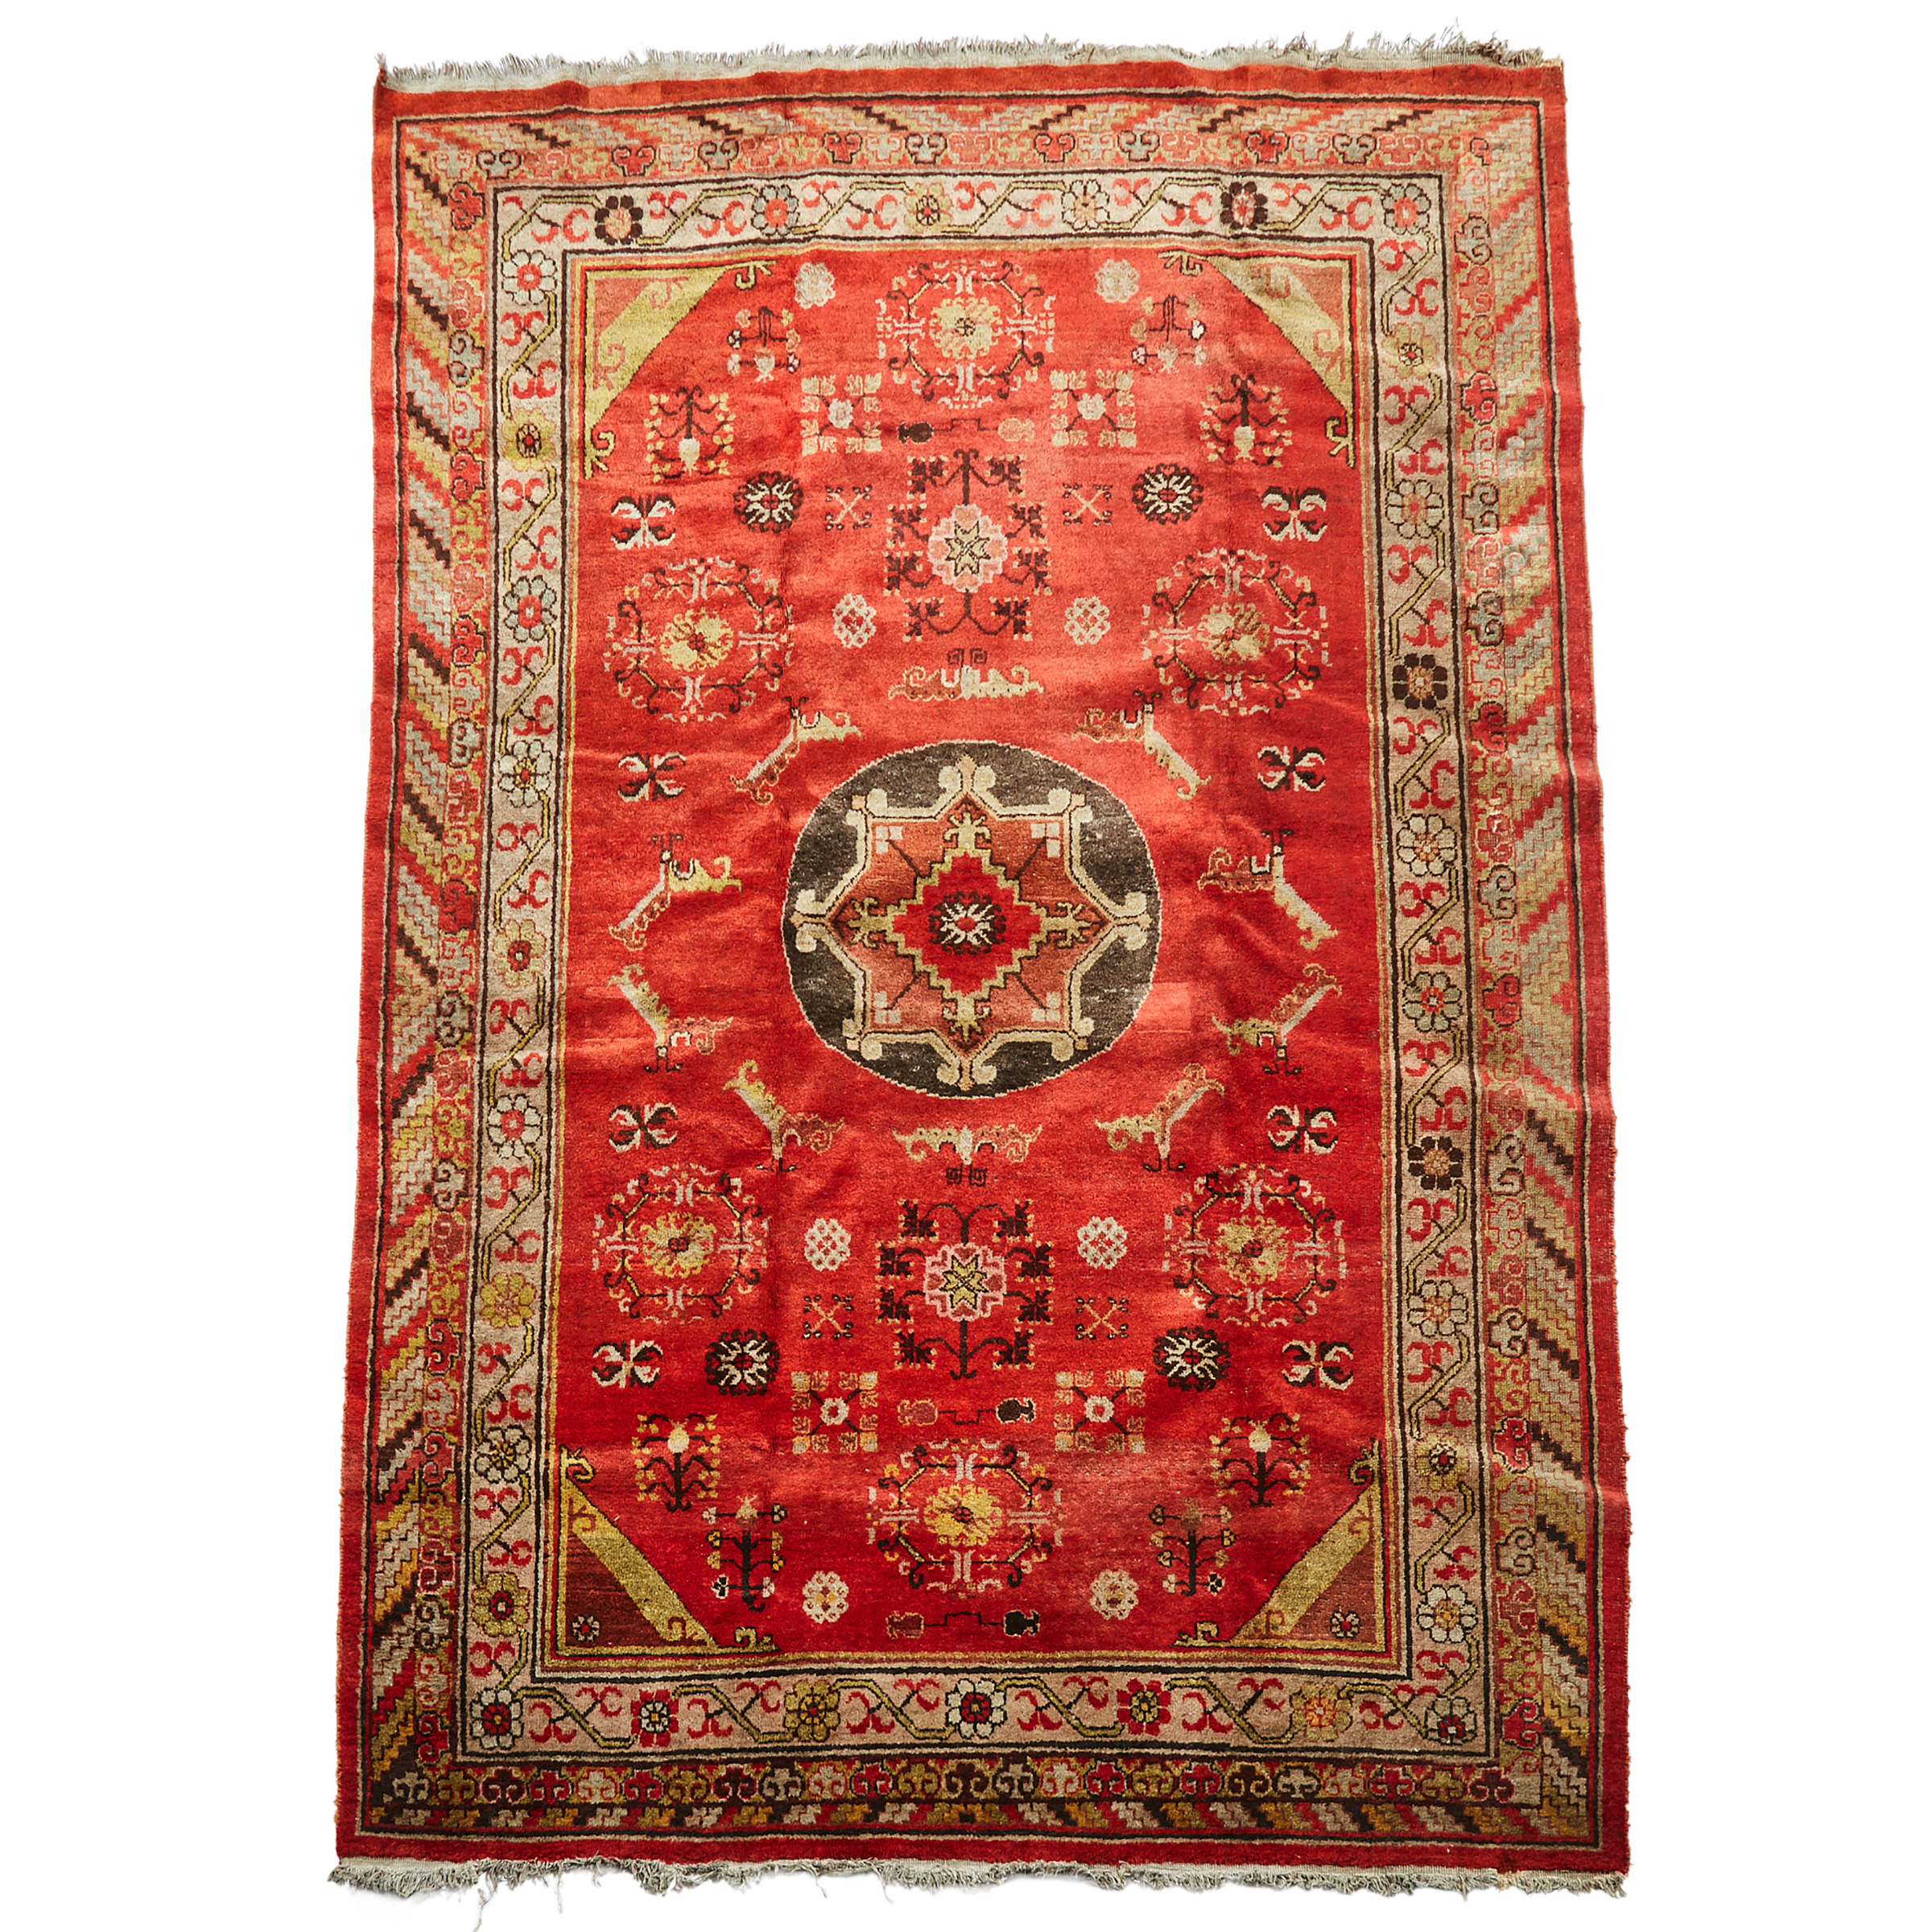 Yarkand Rug, Central Asia, early 20th century